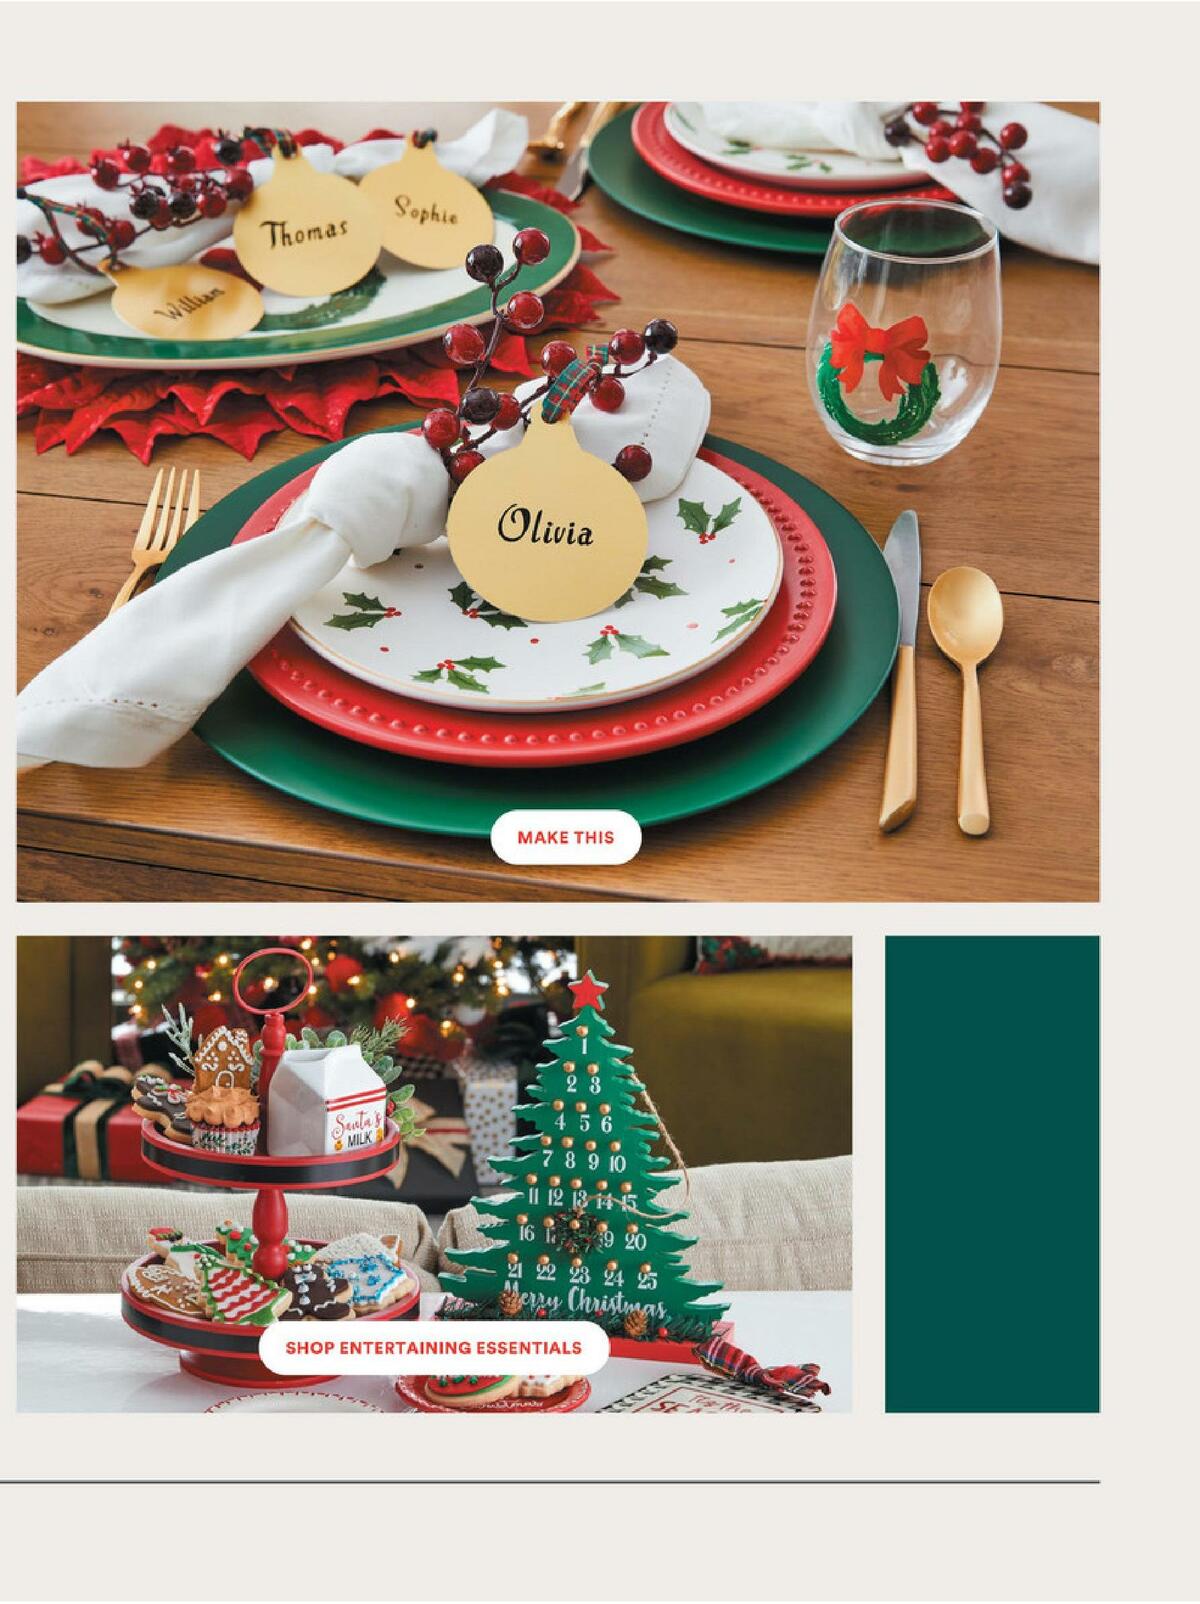 Michaels Holiday Weekly Ad from October 30